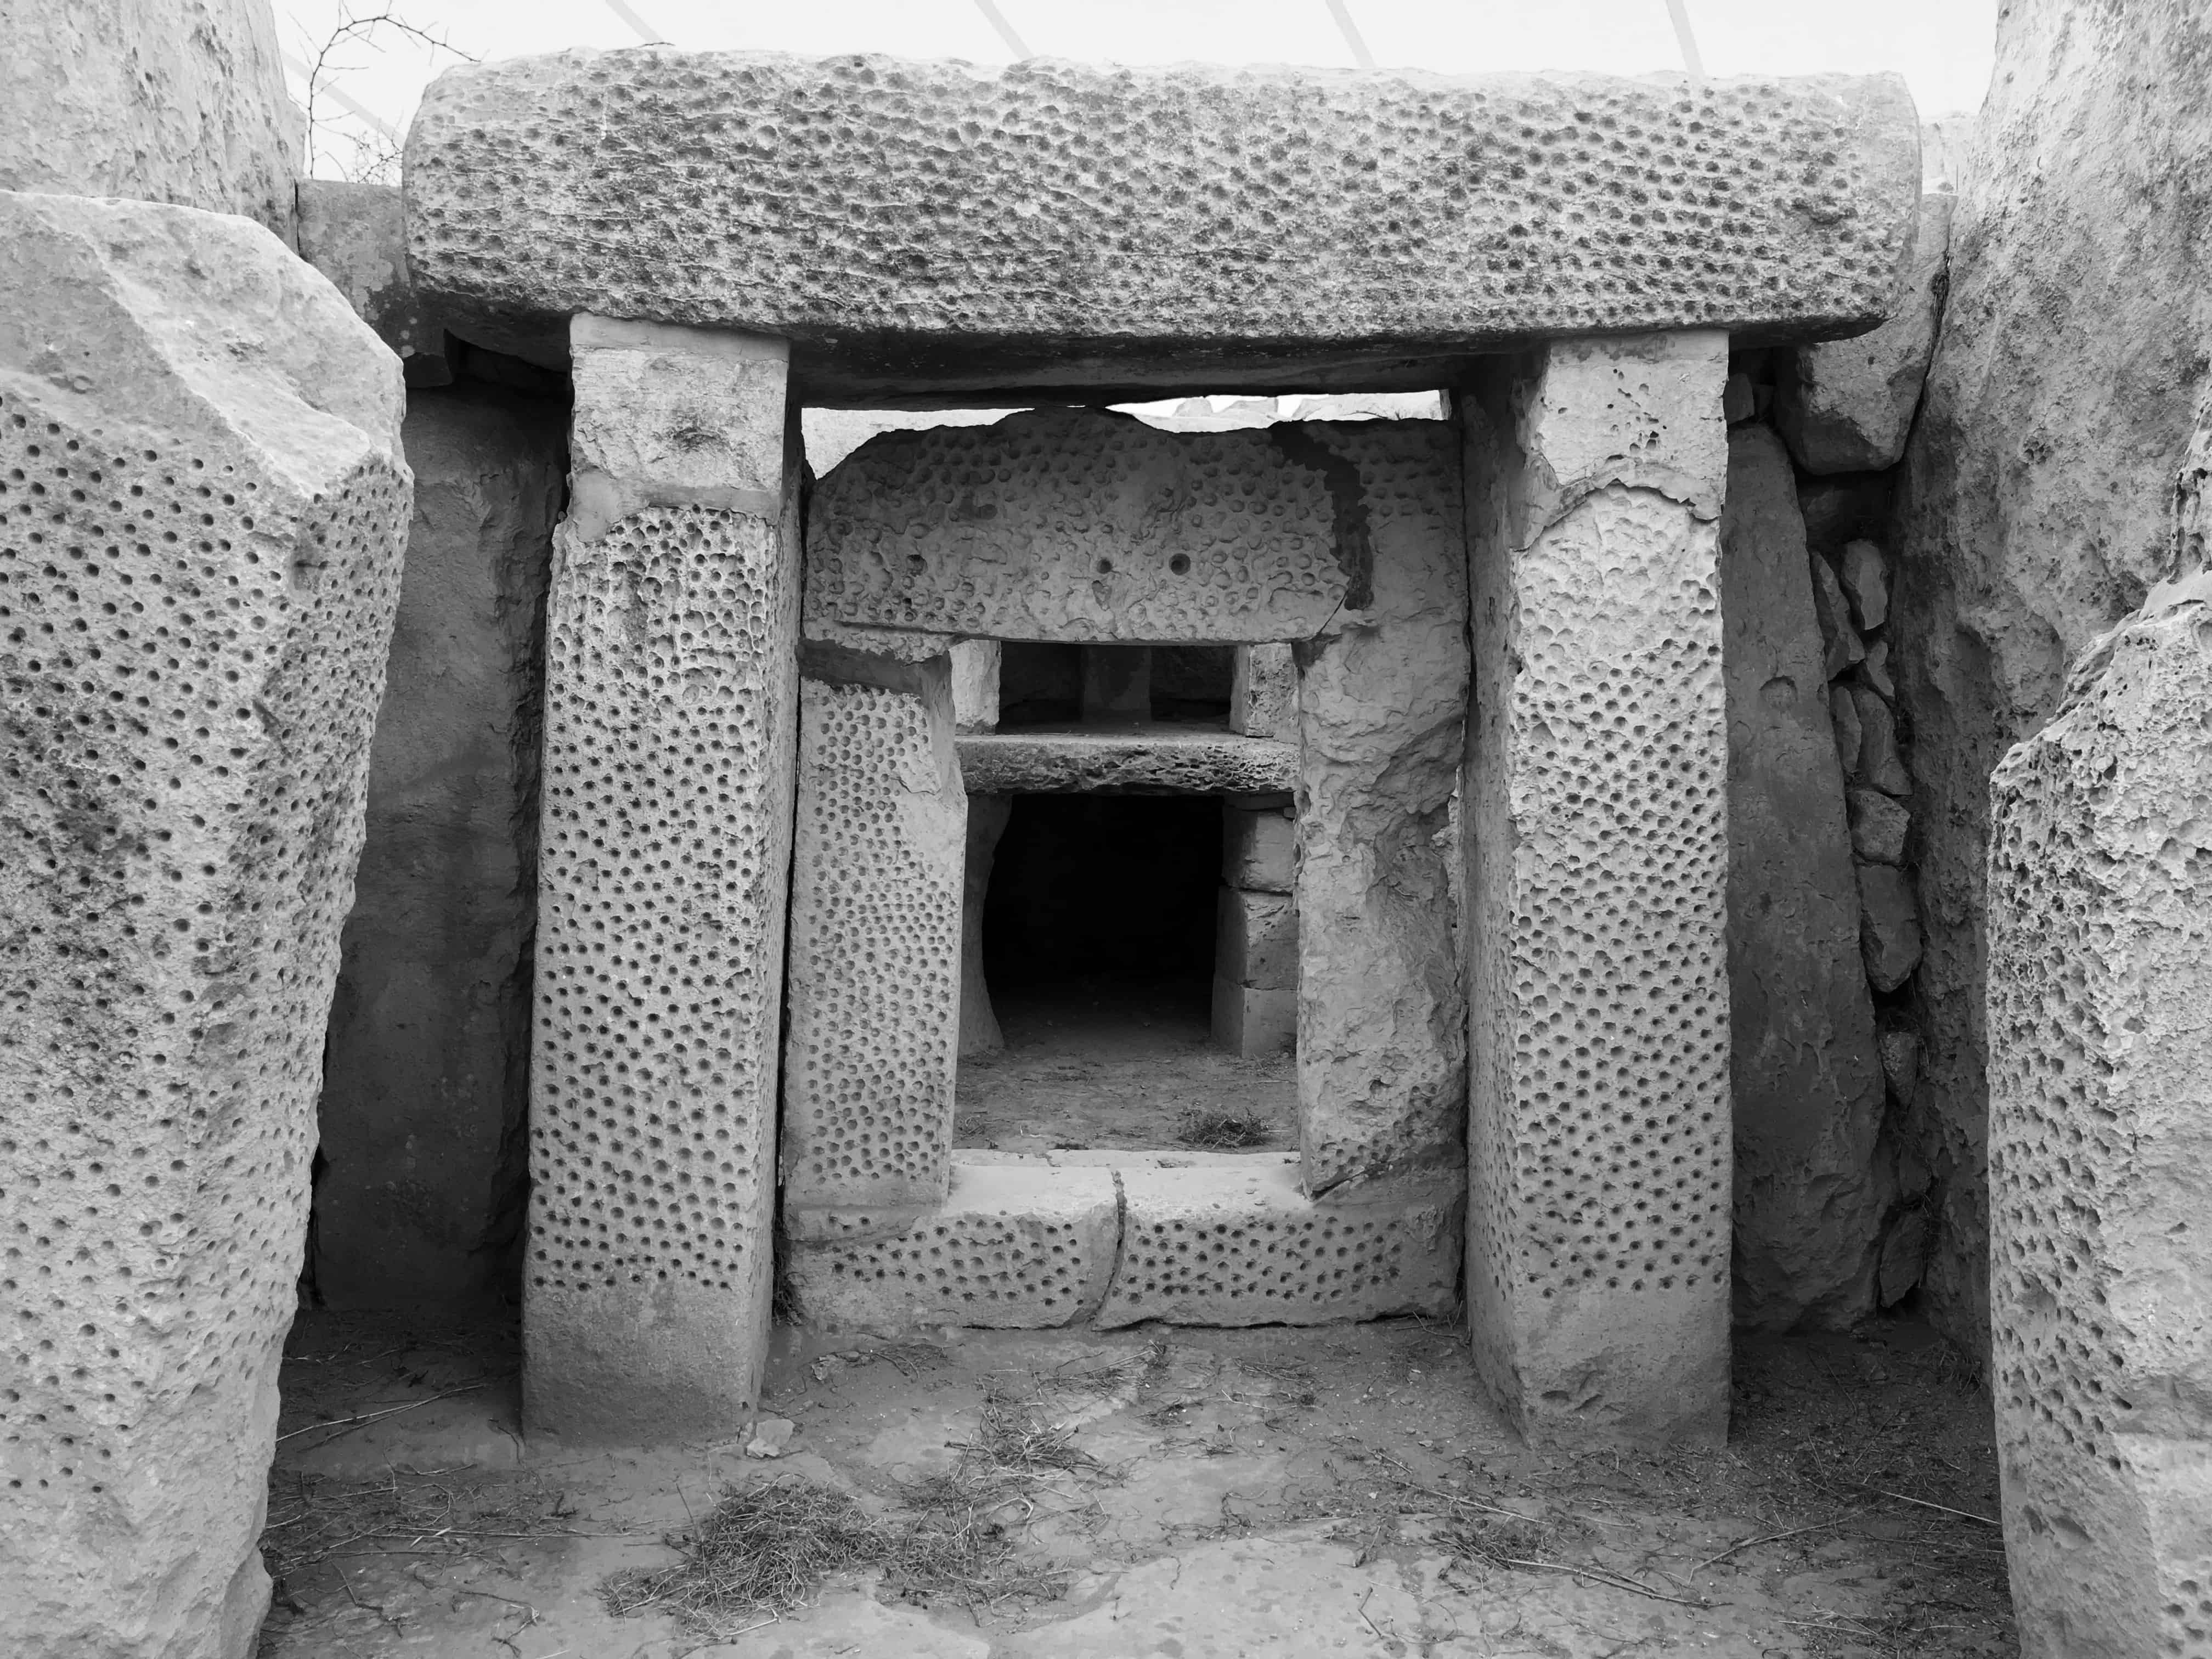 Patterned stone gateway at the megalithic temple, Hagar Qim, in Malta.